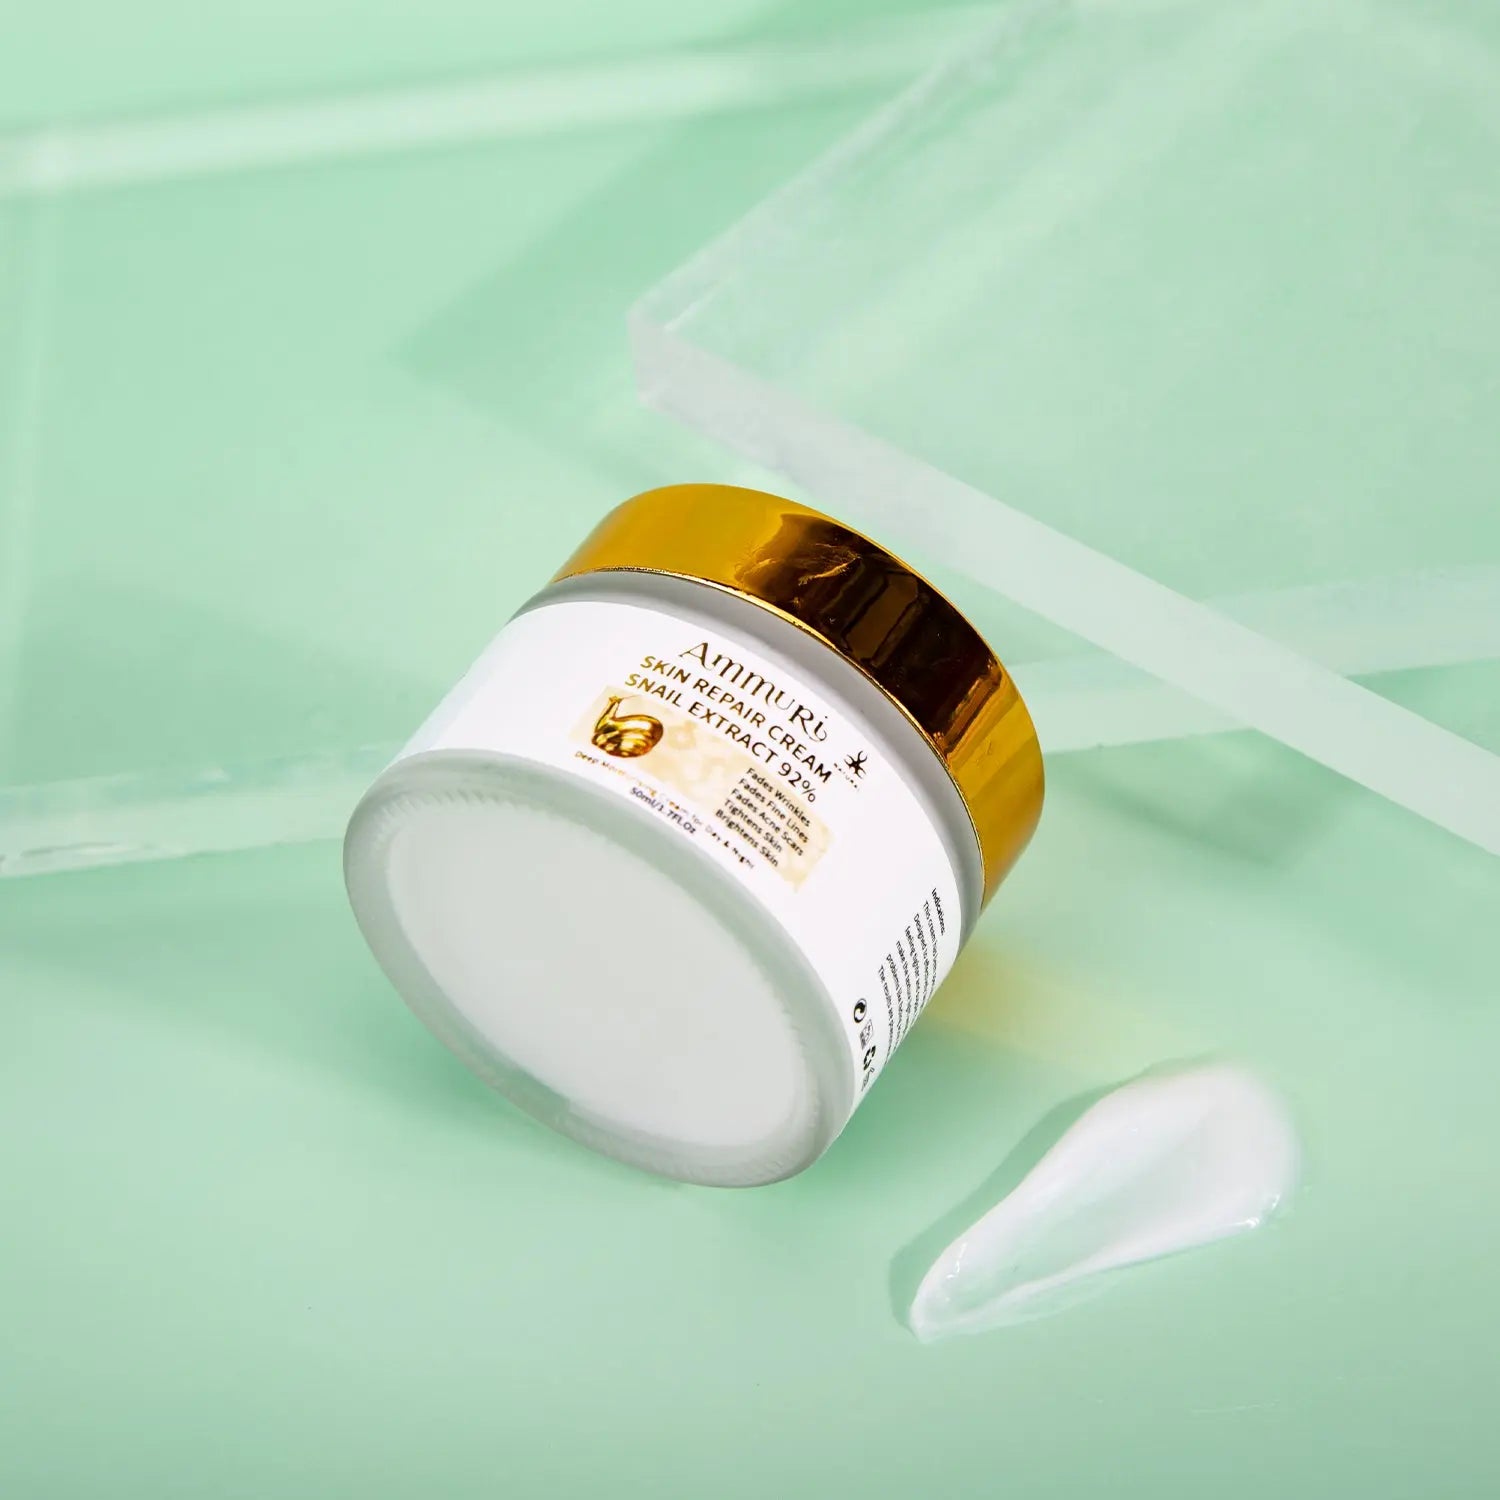 Ammuri Intensely Concentrated Snail Extract Day and Night Cream - Skin Transformation Unveiled Ammuri Skincare